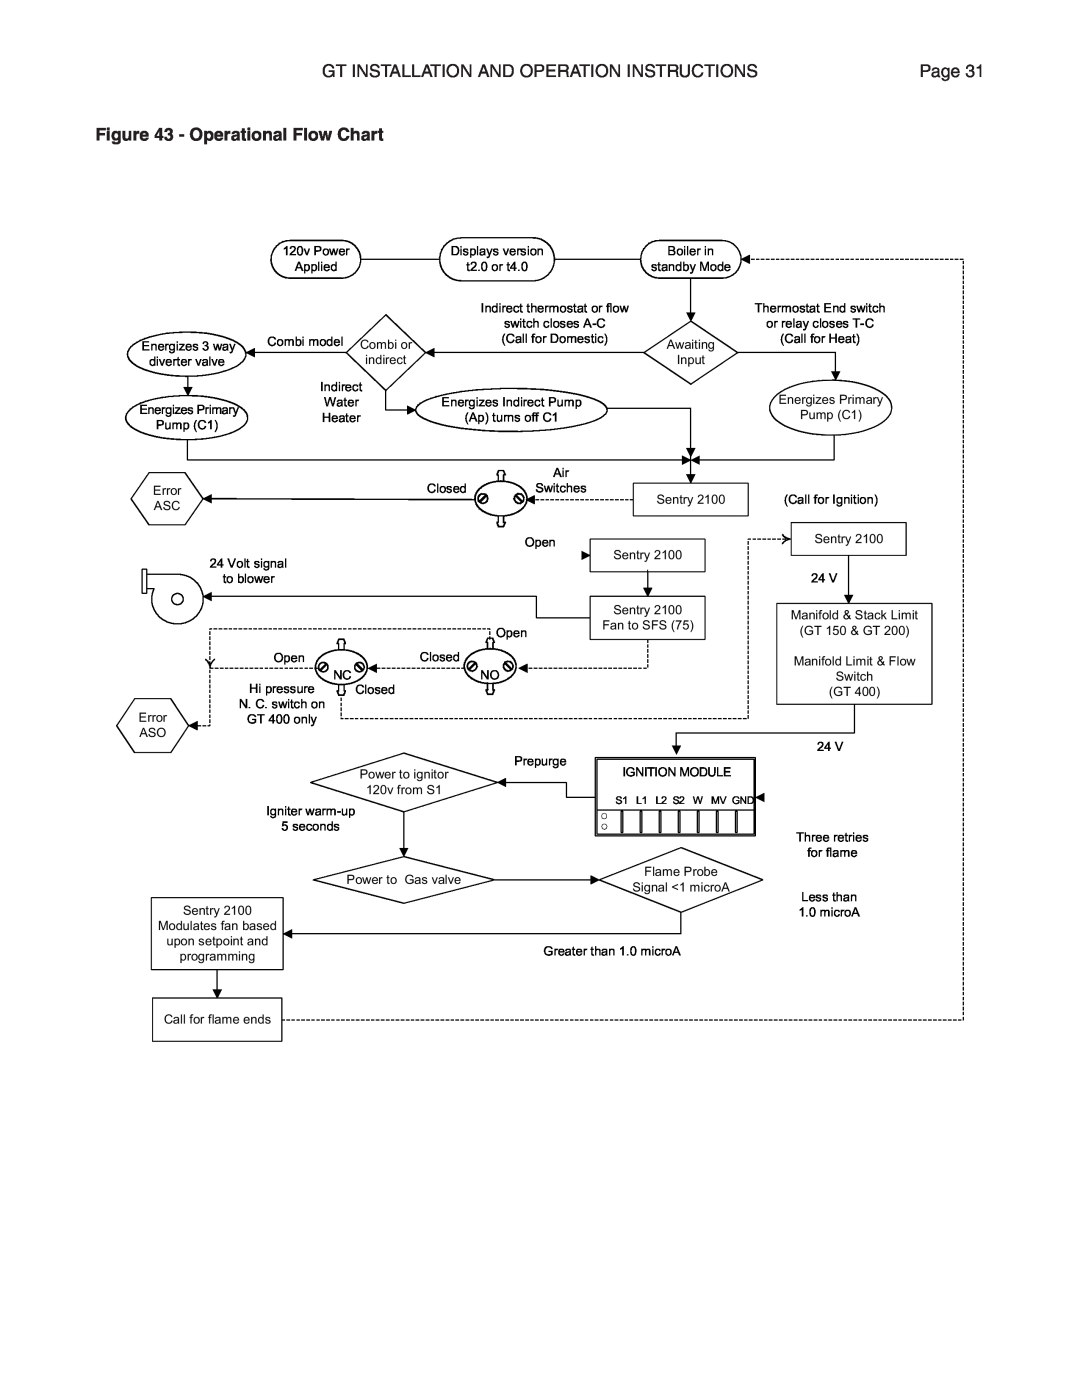 Smith Cast Iron Boilers GT Series manual Operational Flow Chart 